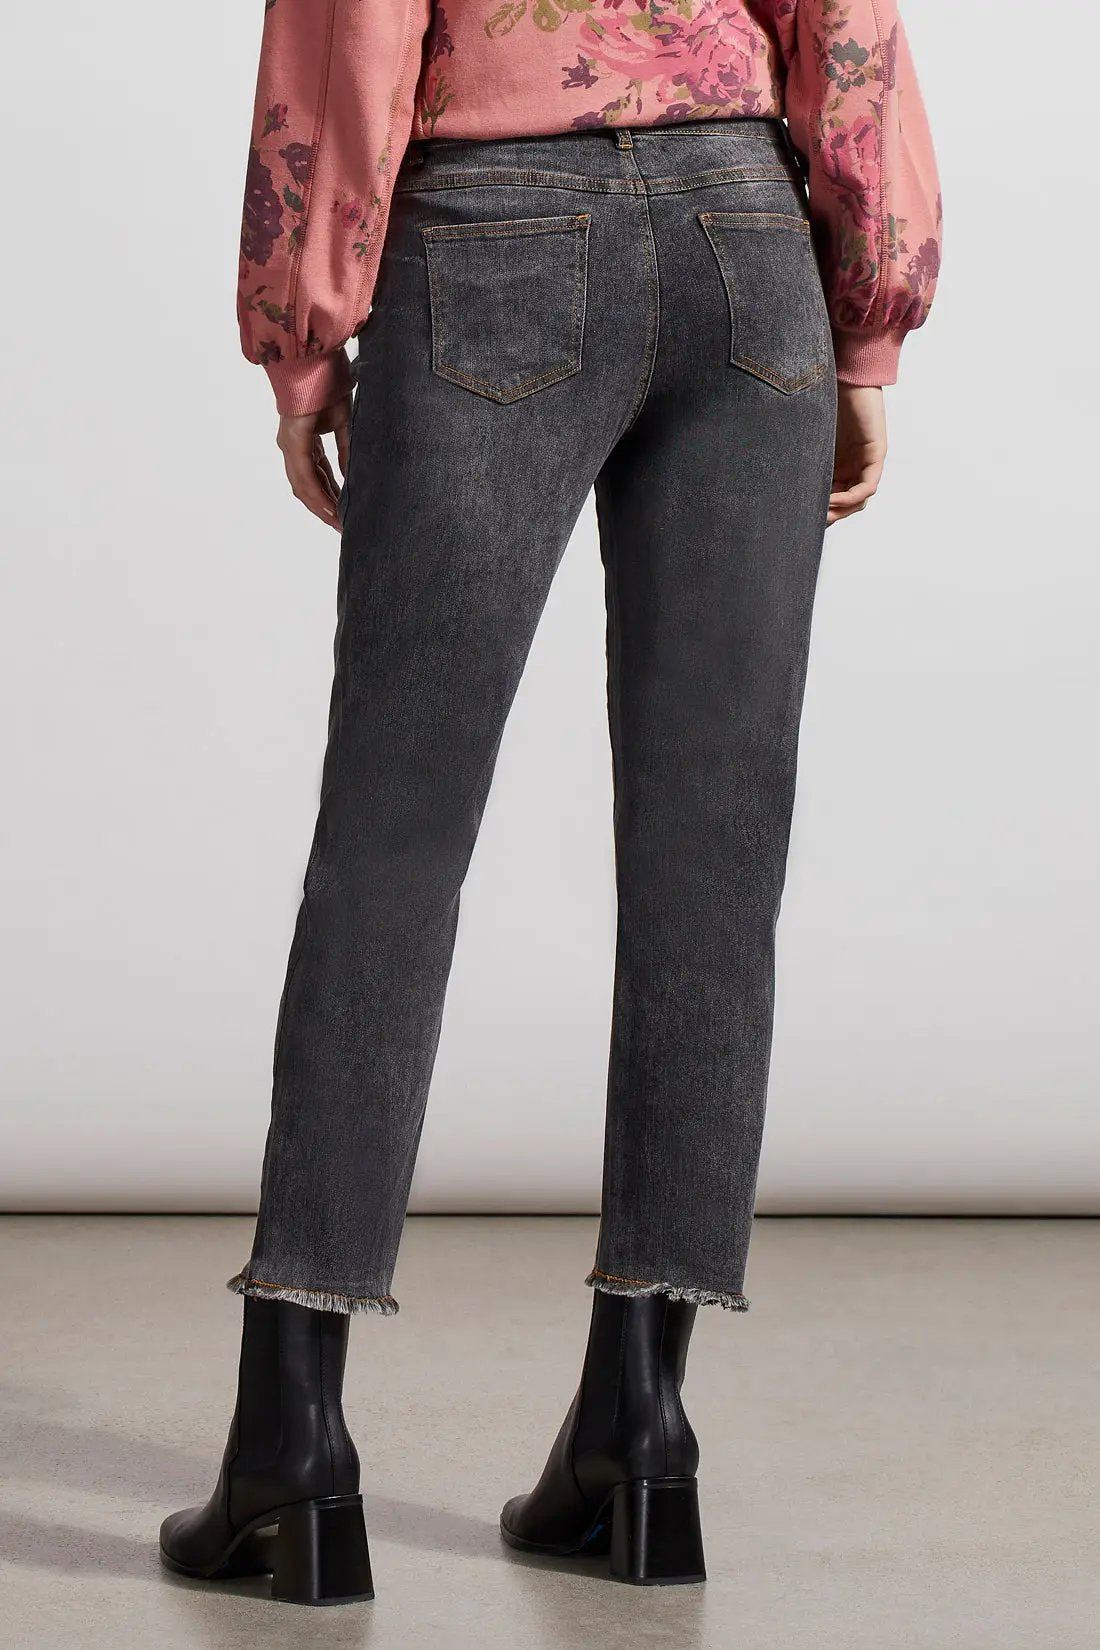 A woman wearing Tribal Audrey GF Straight Ankle Jean with a frayed bottom.